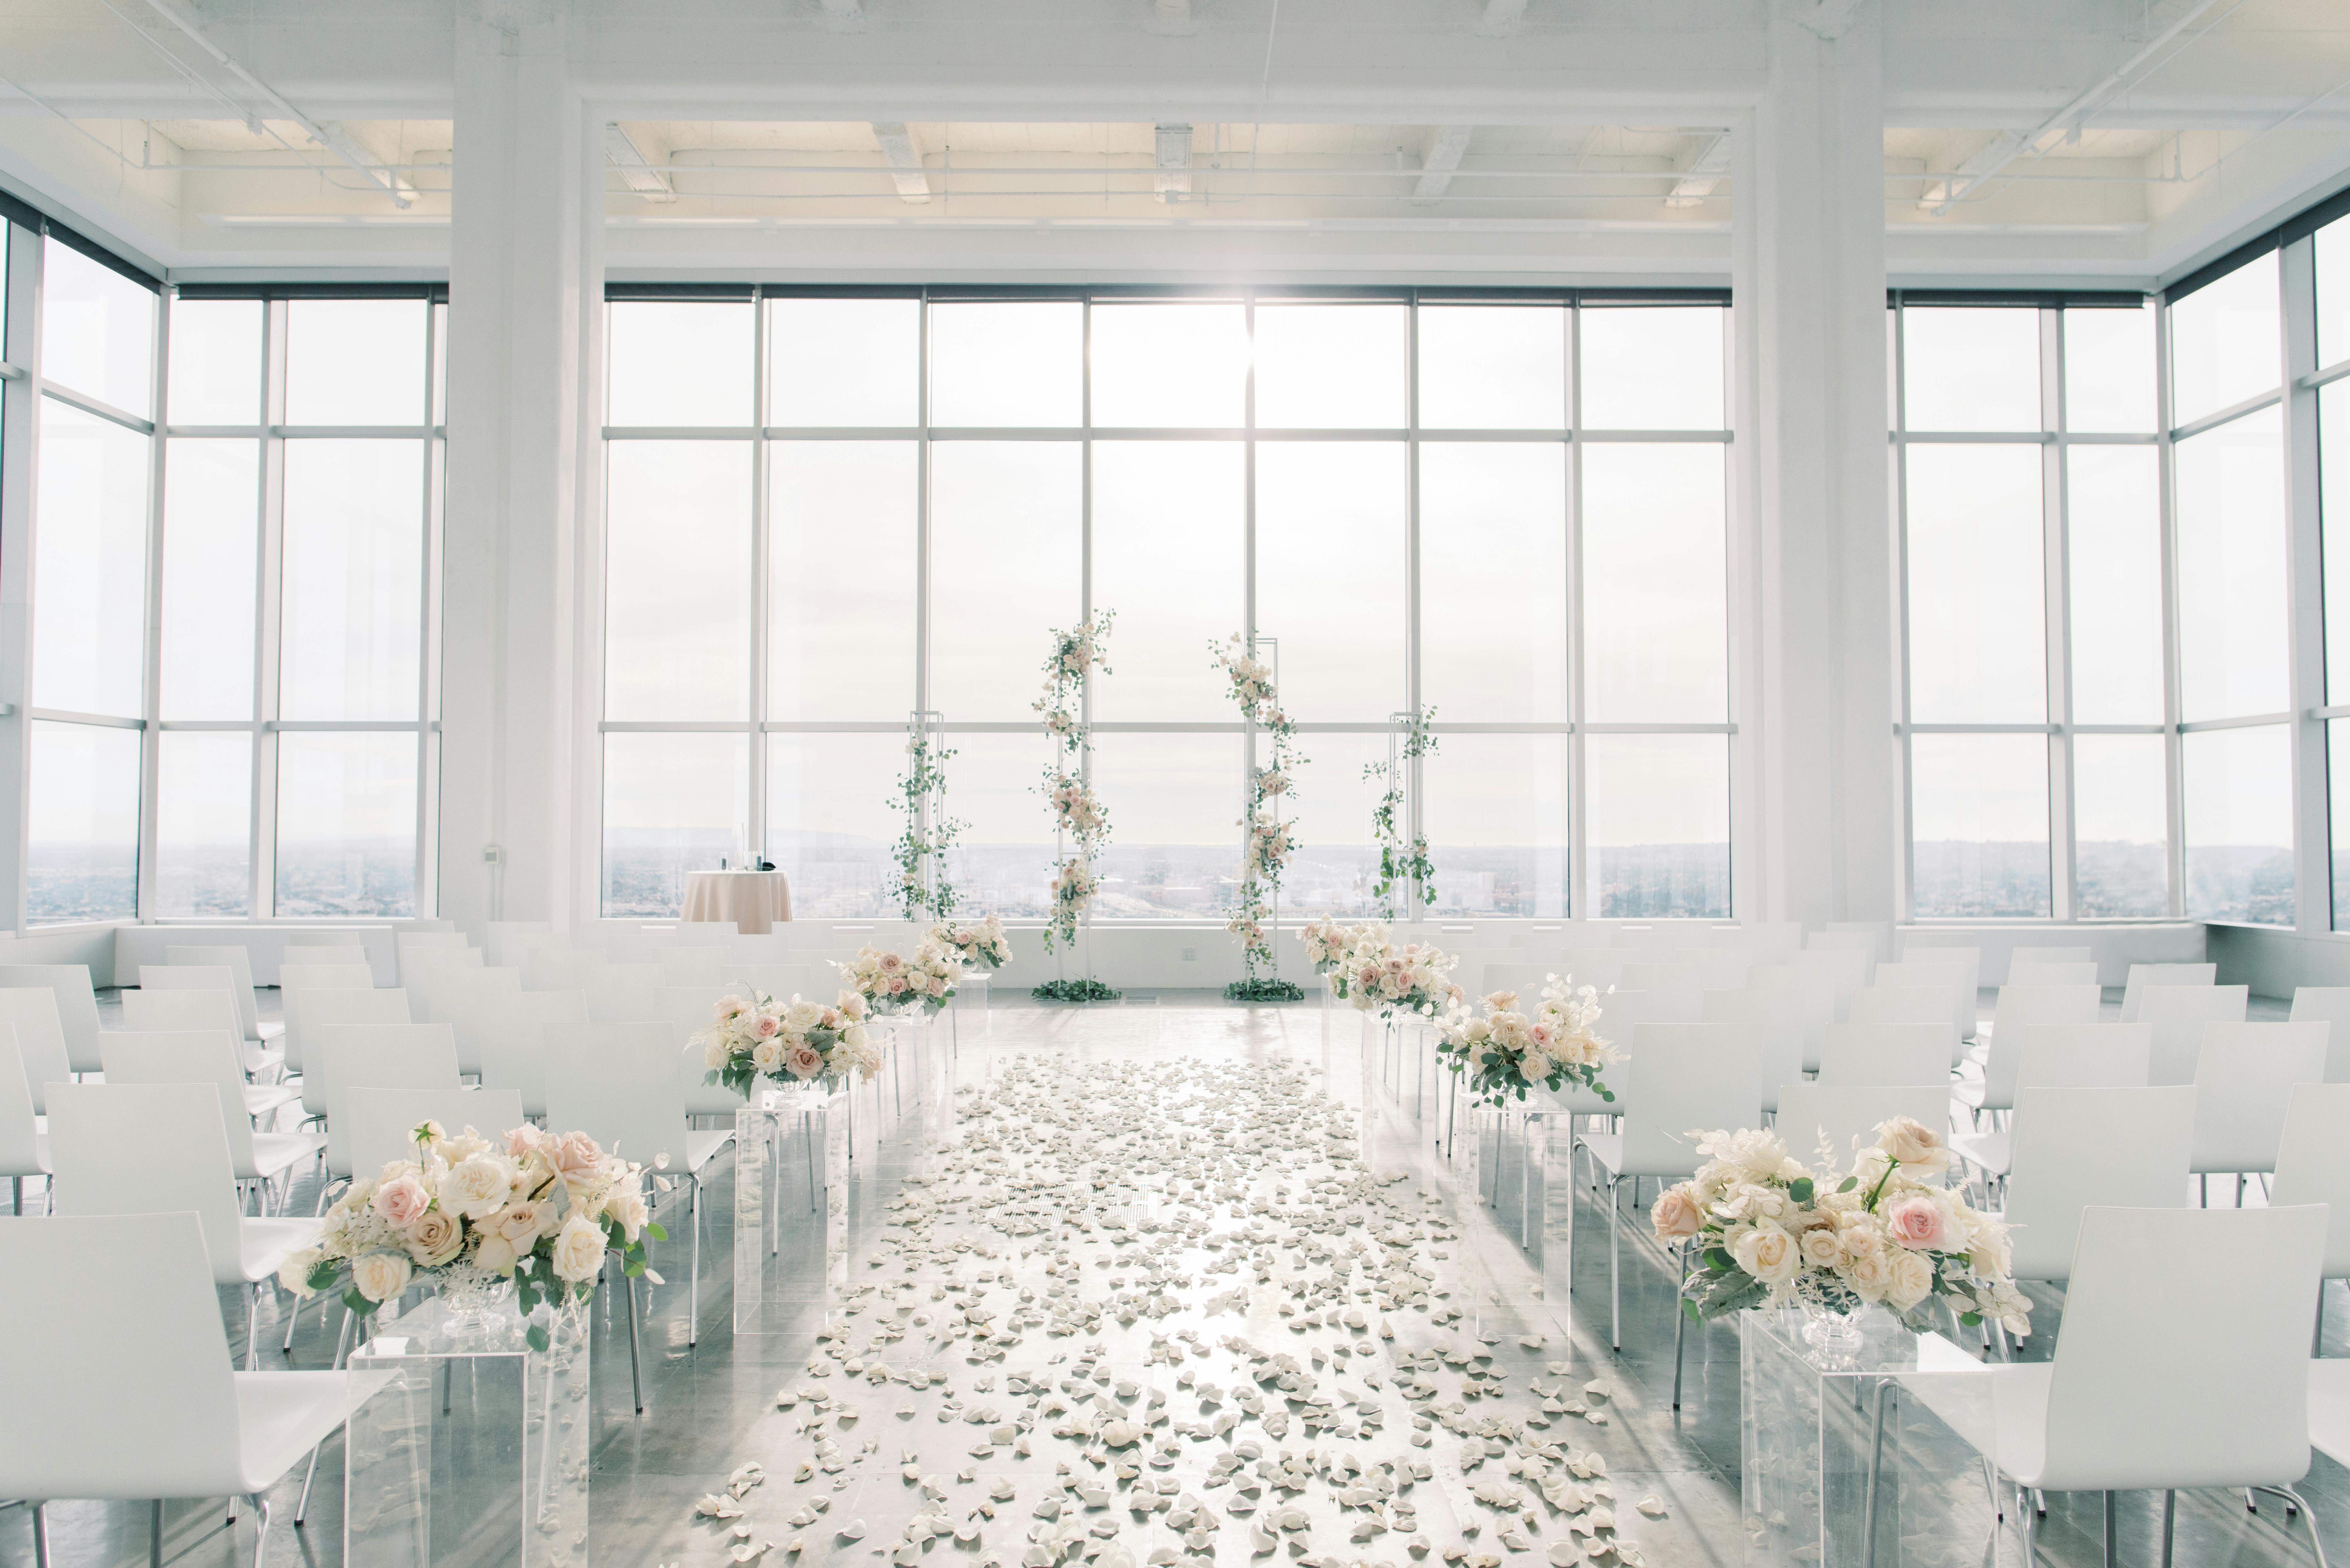 Bright White Wedding With Monochromatic Wedding Aisle Décor And Portrait Style Windows | PartySlate